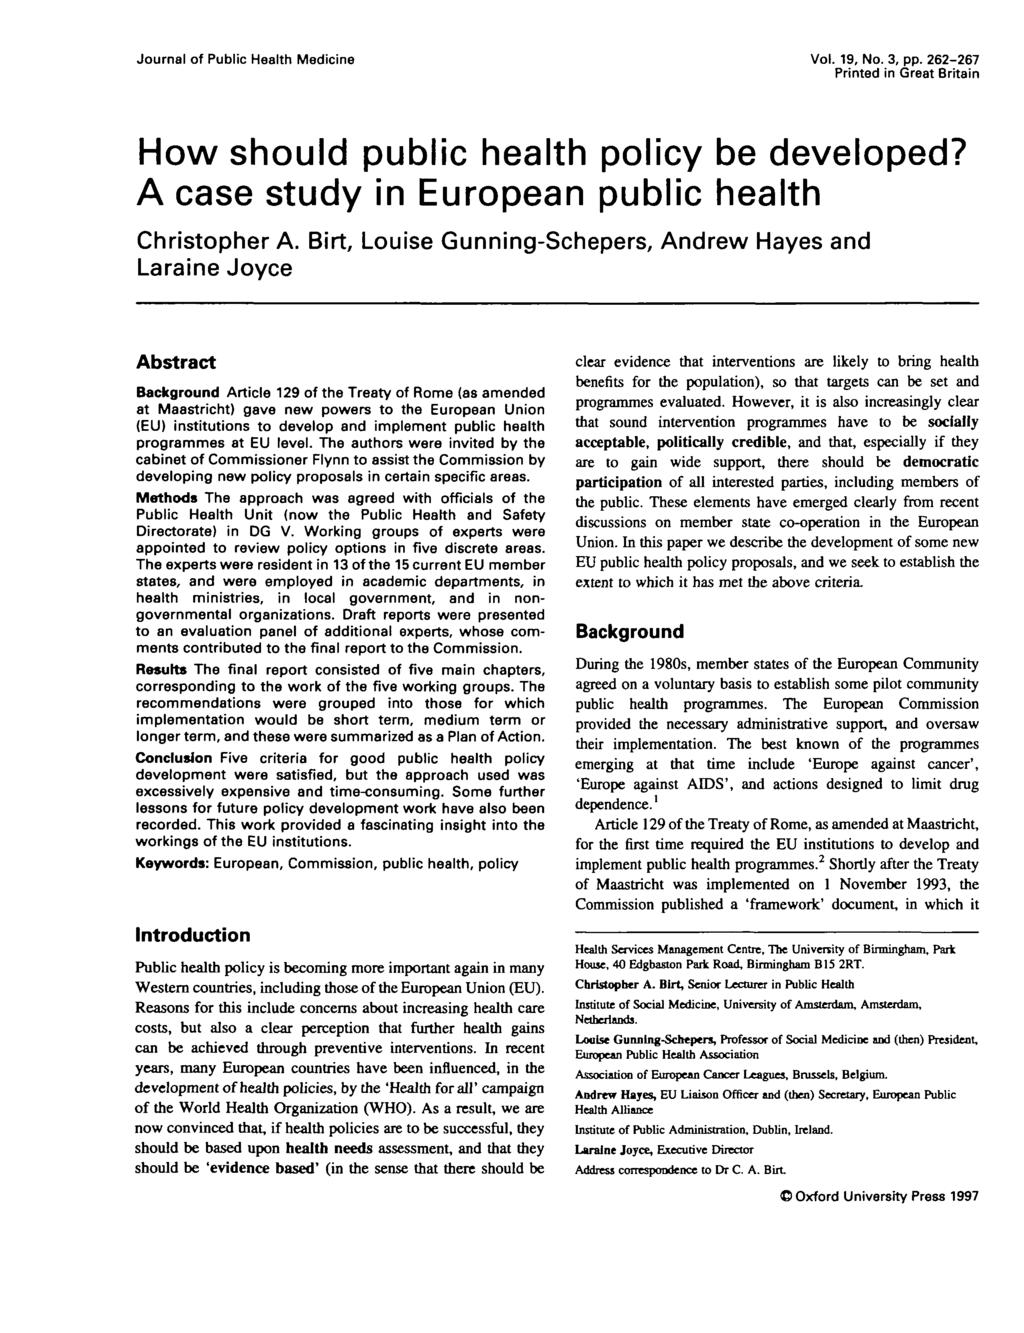 Journal of Public Health Medicine Vol. 19, No. 3, pp. 262-267 Printed in Great Britain How should public health policy be developed? A case study in European public health Christopher A.